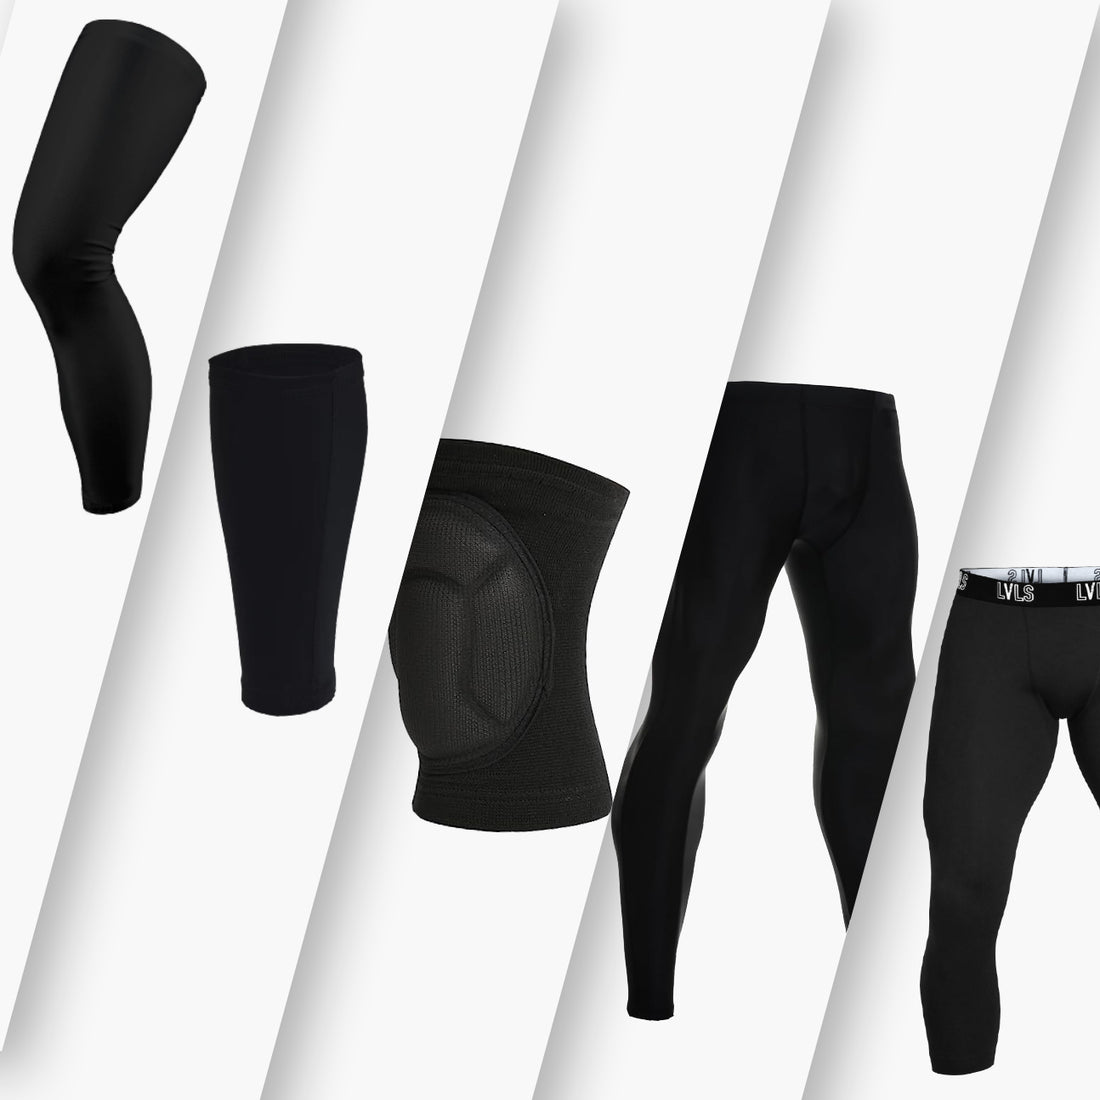 Should You Wear Knee Sleeves Over Leggings? 4 Considerations